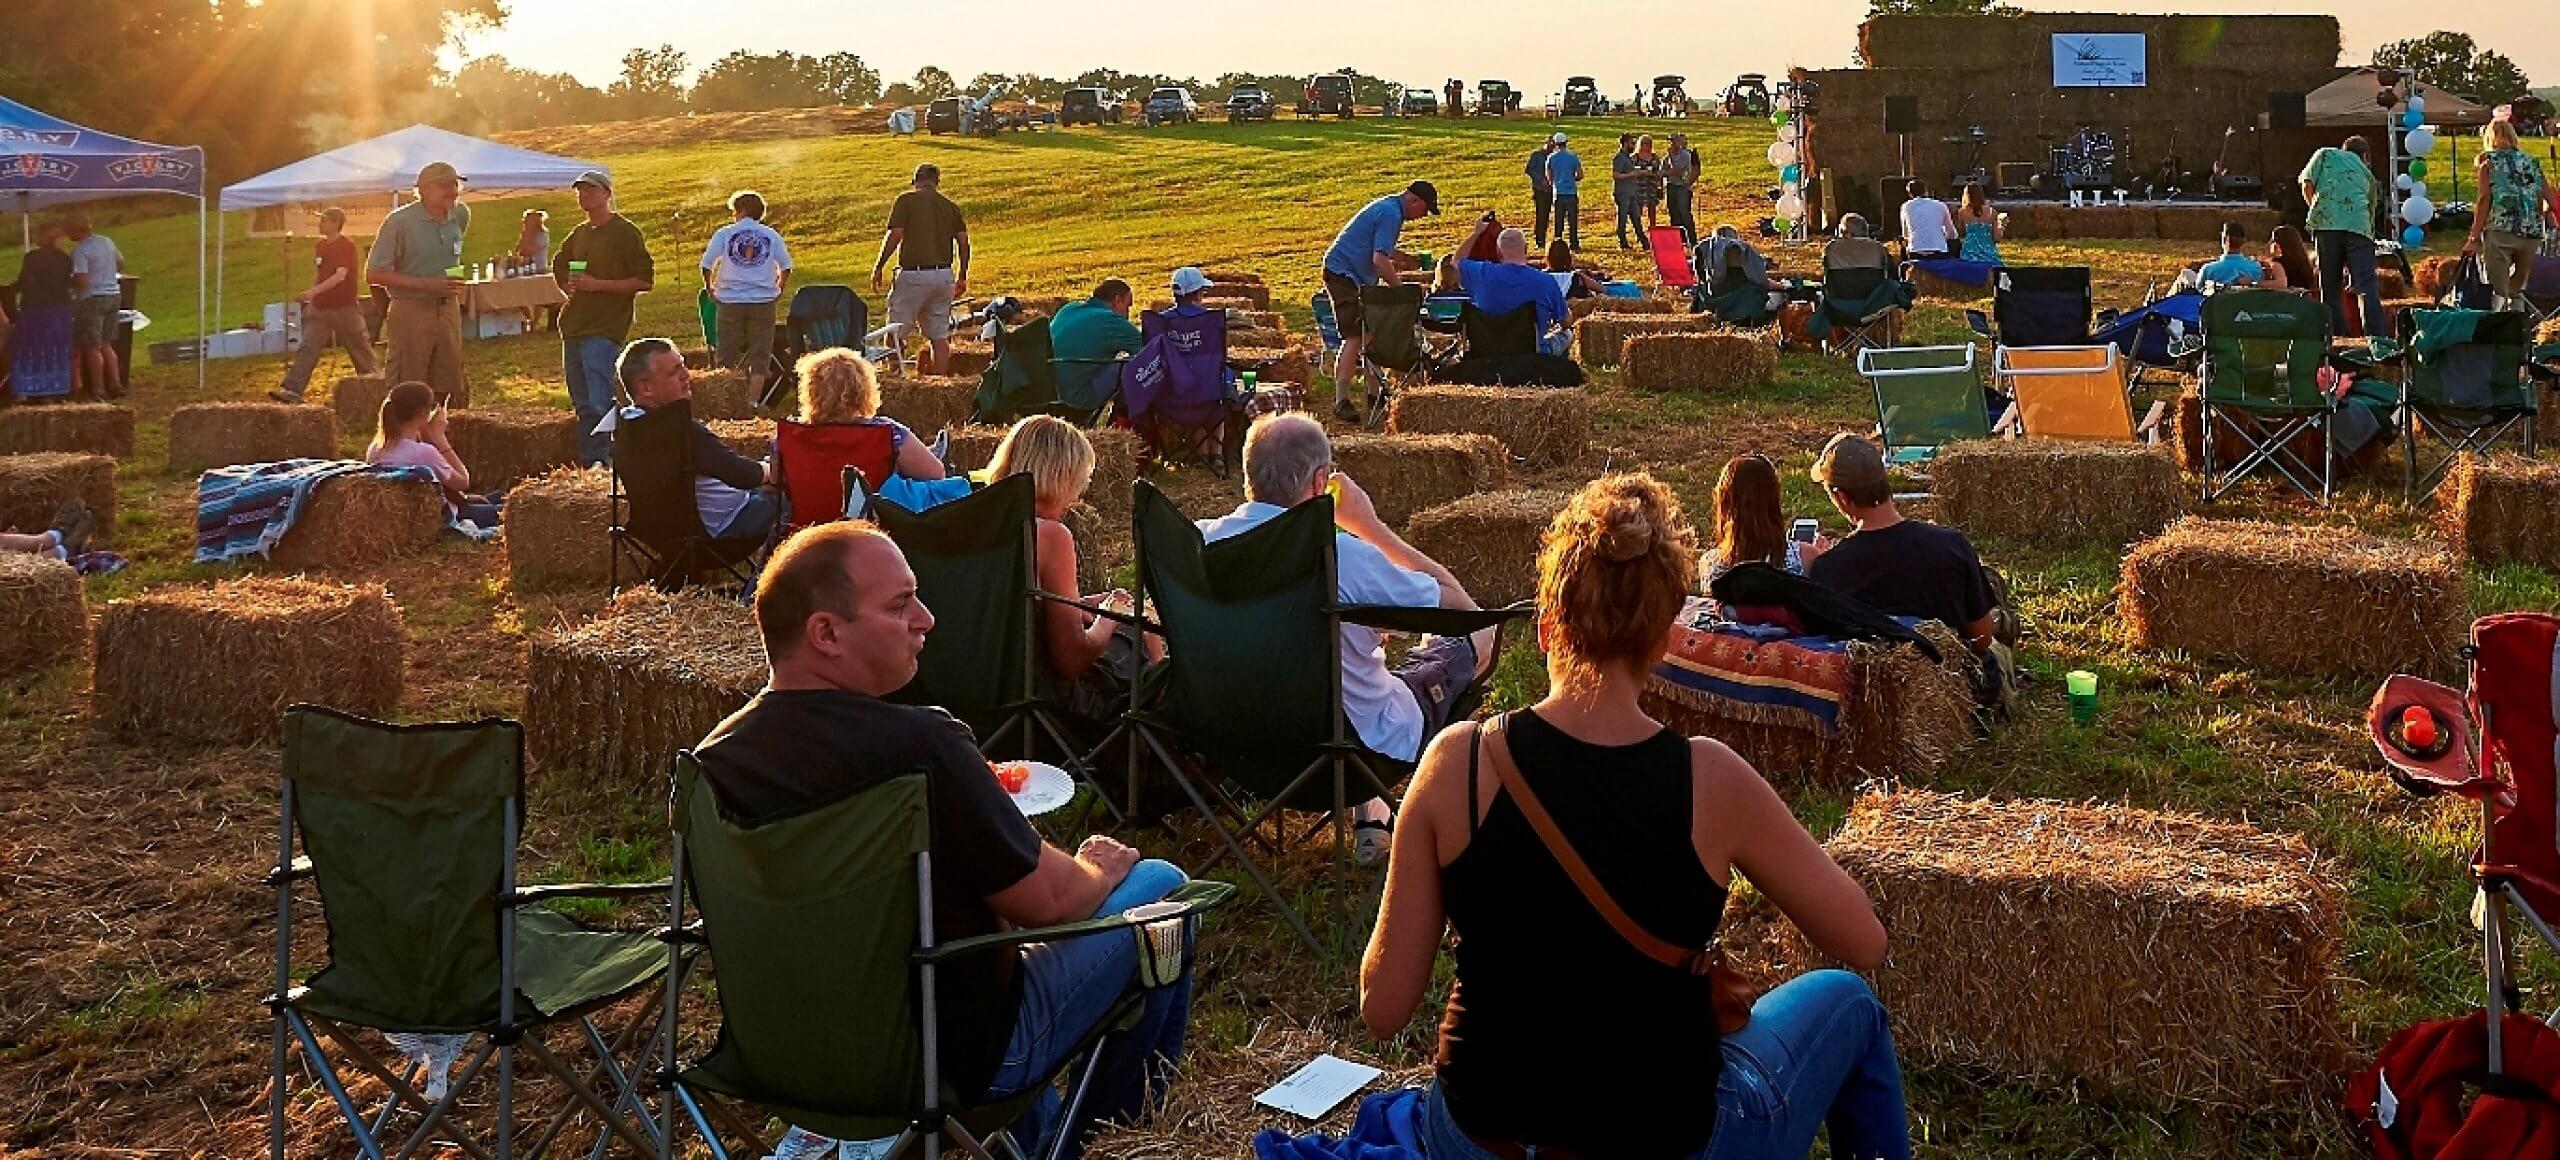 A crowd of people sitting on haybales and camping chairs while the sun goes down.